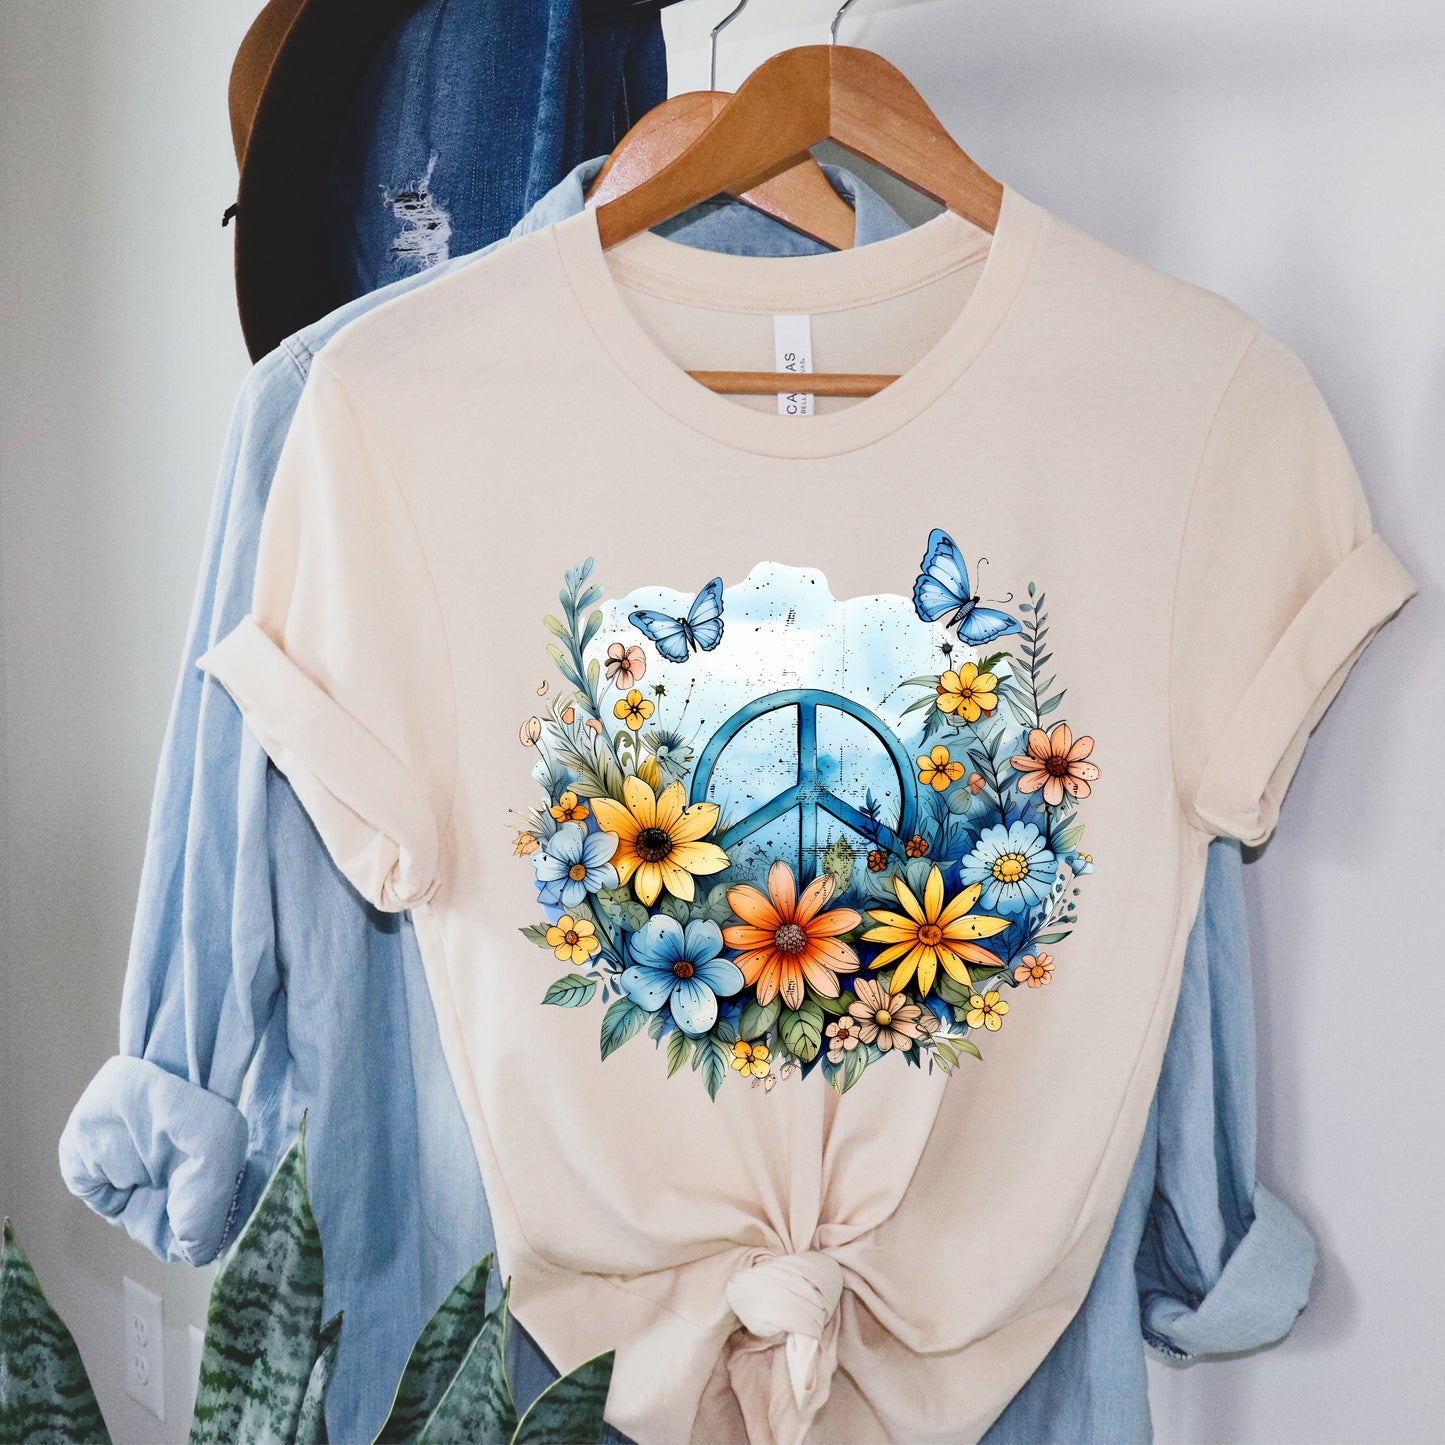 Peaceful Feelings:  Peace Sign Short Sleeve T-Shirt With Flowers and Butterflies